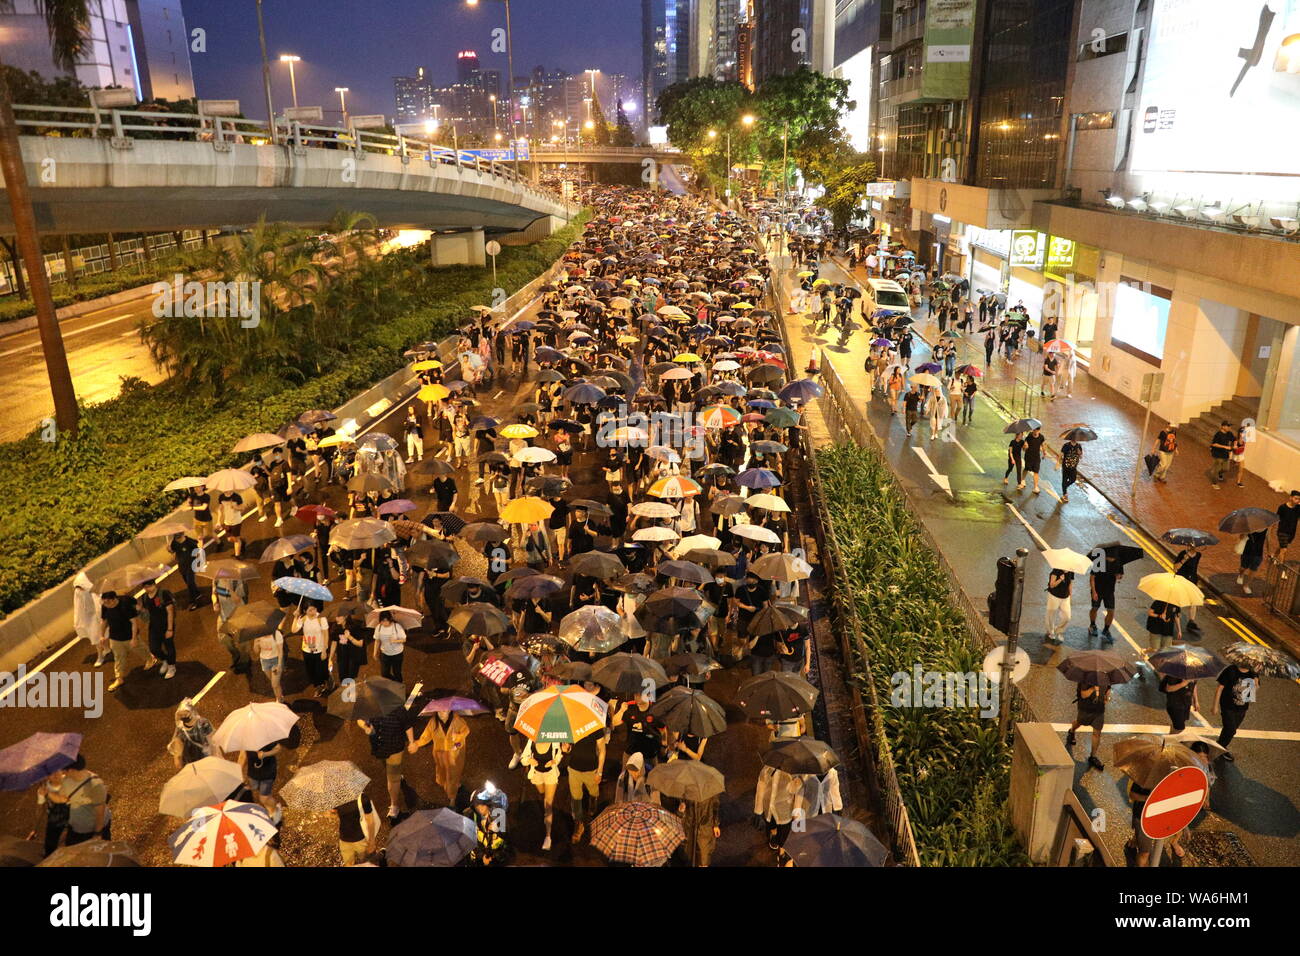 Hong Kong, China. 18th August 2019. Hong Kong Anti Extradition protest. Hundreds of thousands of protesters march through main roads on Hong Kong Island. Credit: David Coulson/Alamy Live News Stock Photo